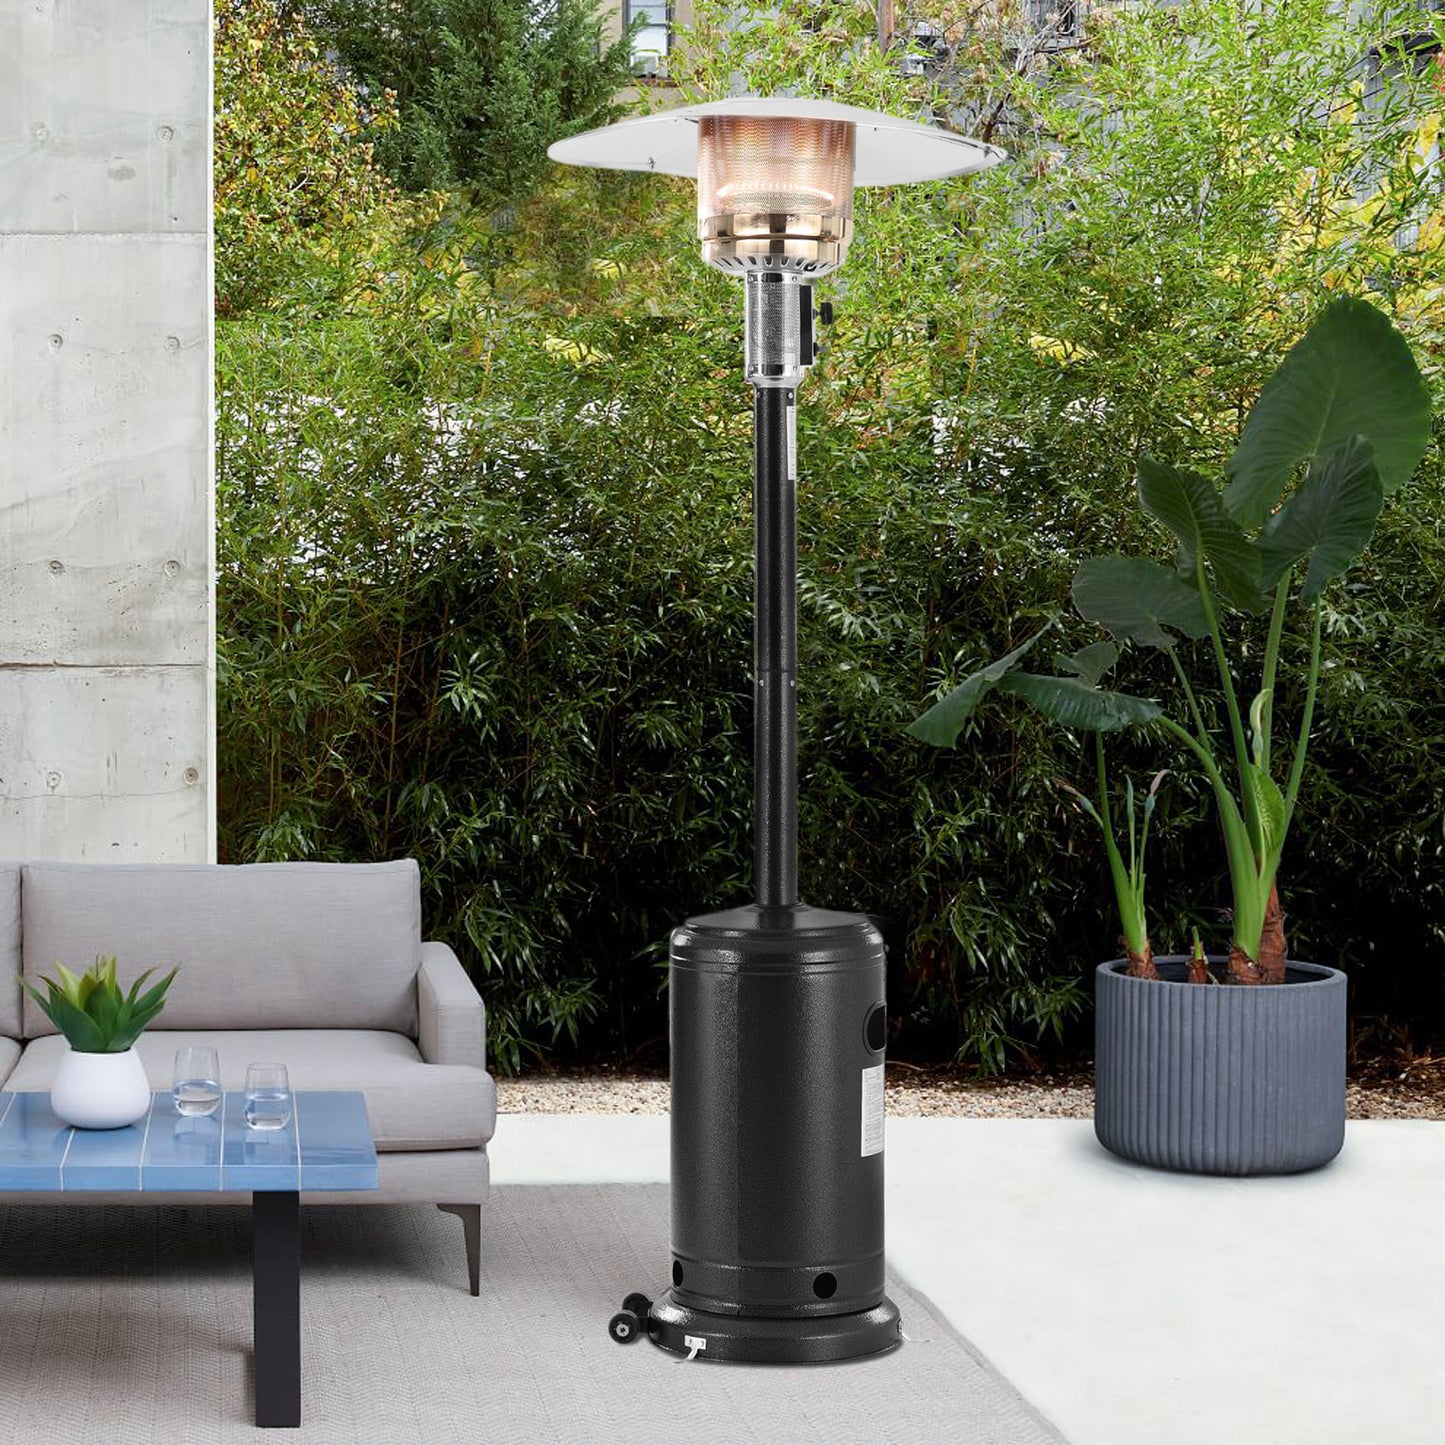 Outdoor Heaters for Patios, 48000BTU Propane Patio Heater with Wheels Safe Auto Shut Off Device for Commercial & Residential, Black, LJ2744